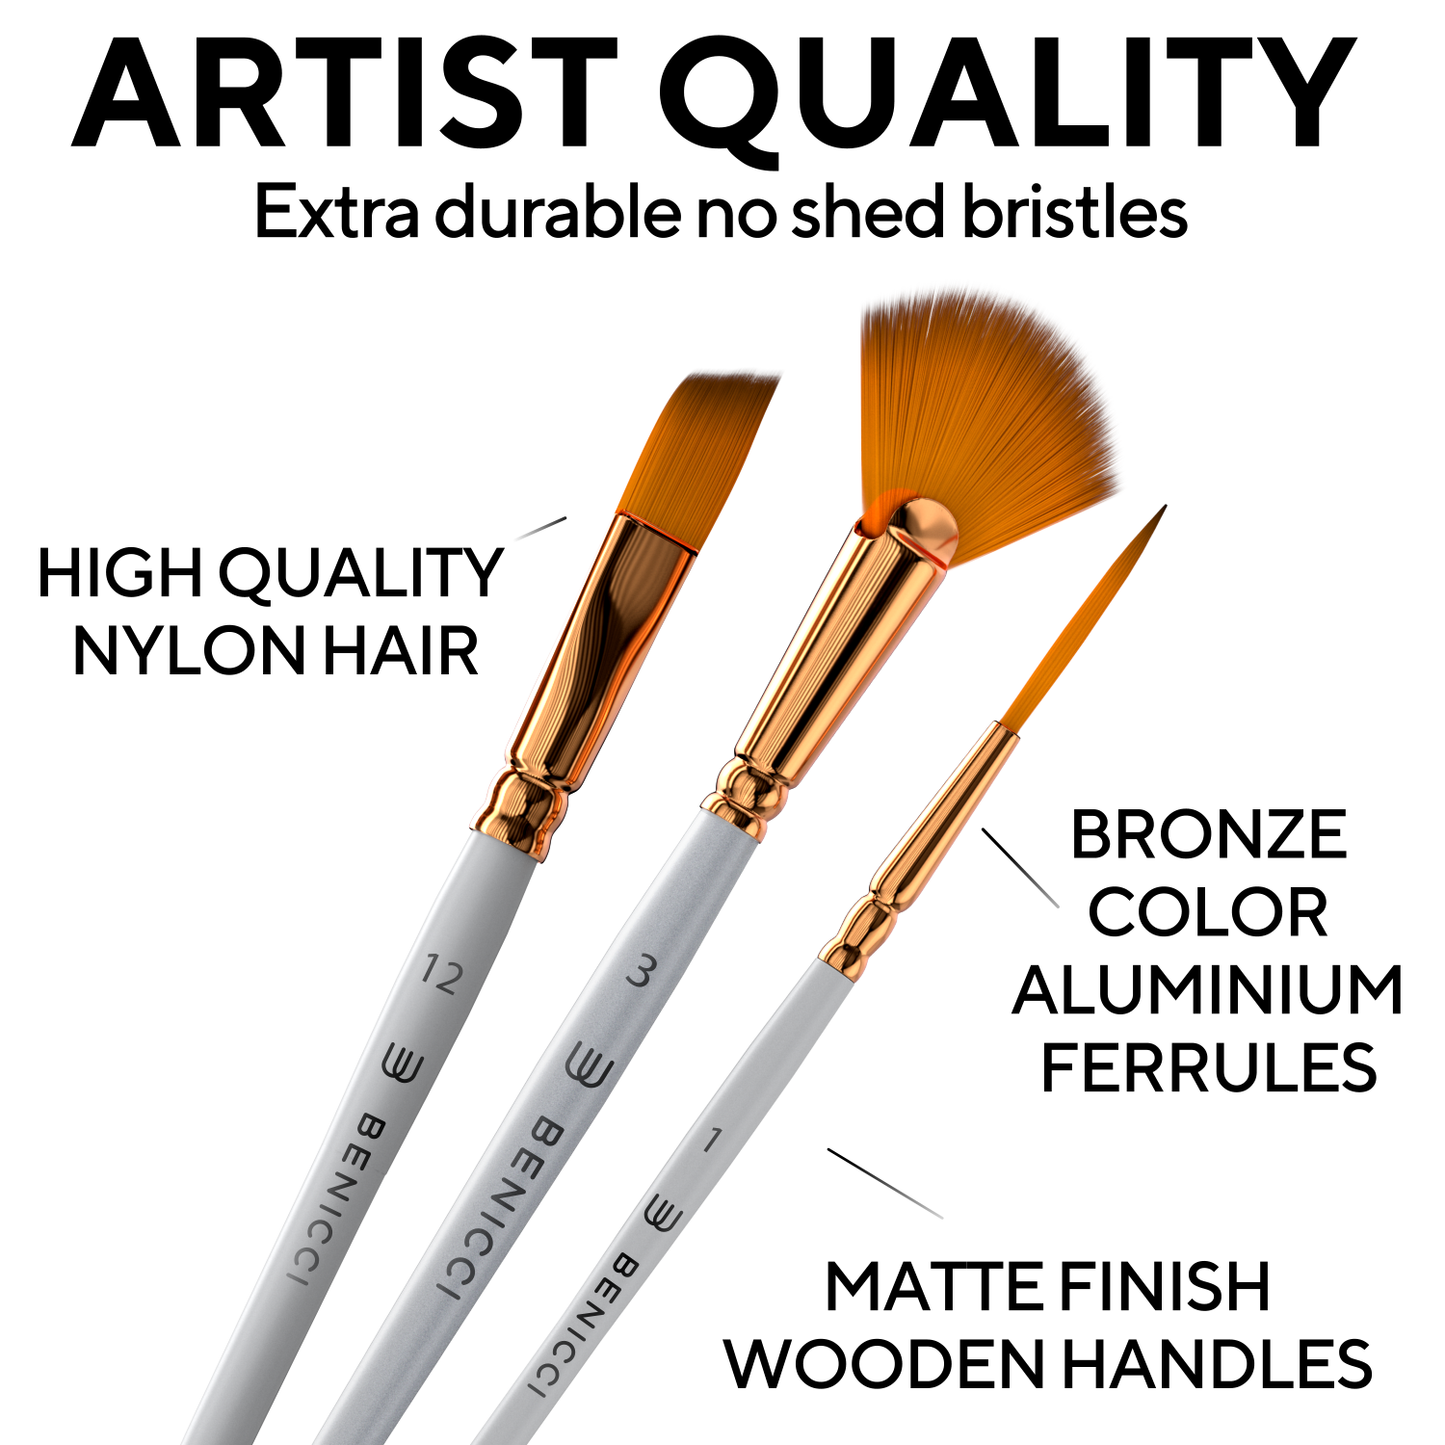 Artist Paint Brush Set of 16 - Includes Spatula Palette Knife, Sponge & Organizing Case - Premium Paint Brushes for Acrylic Painting, Watercolor, Oil - Perfect for Kids, Adults or Professionals